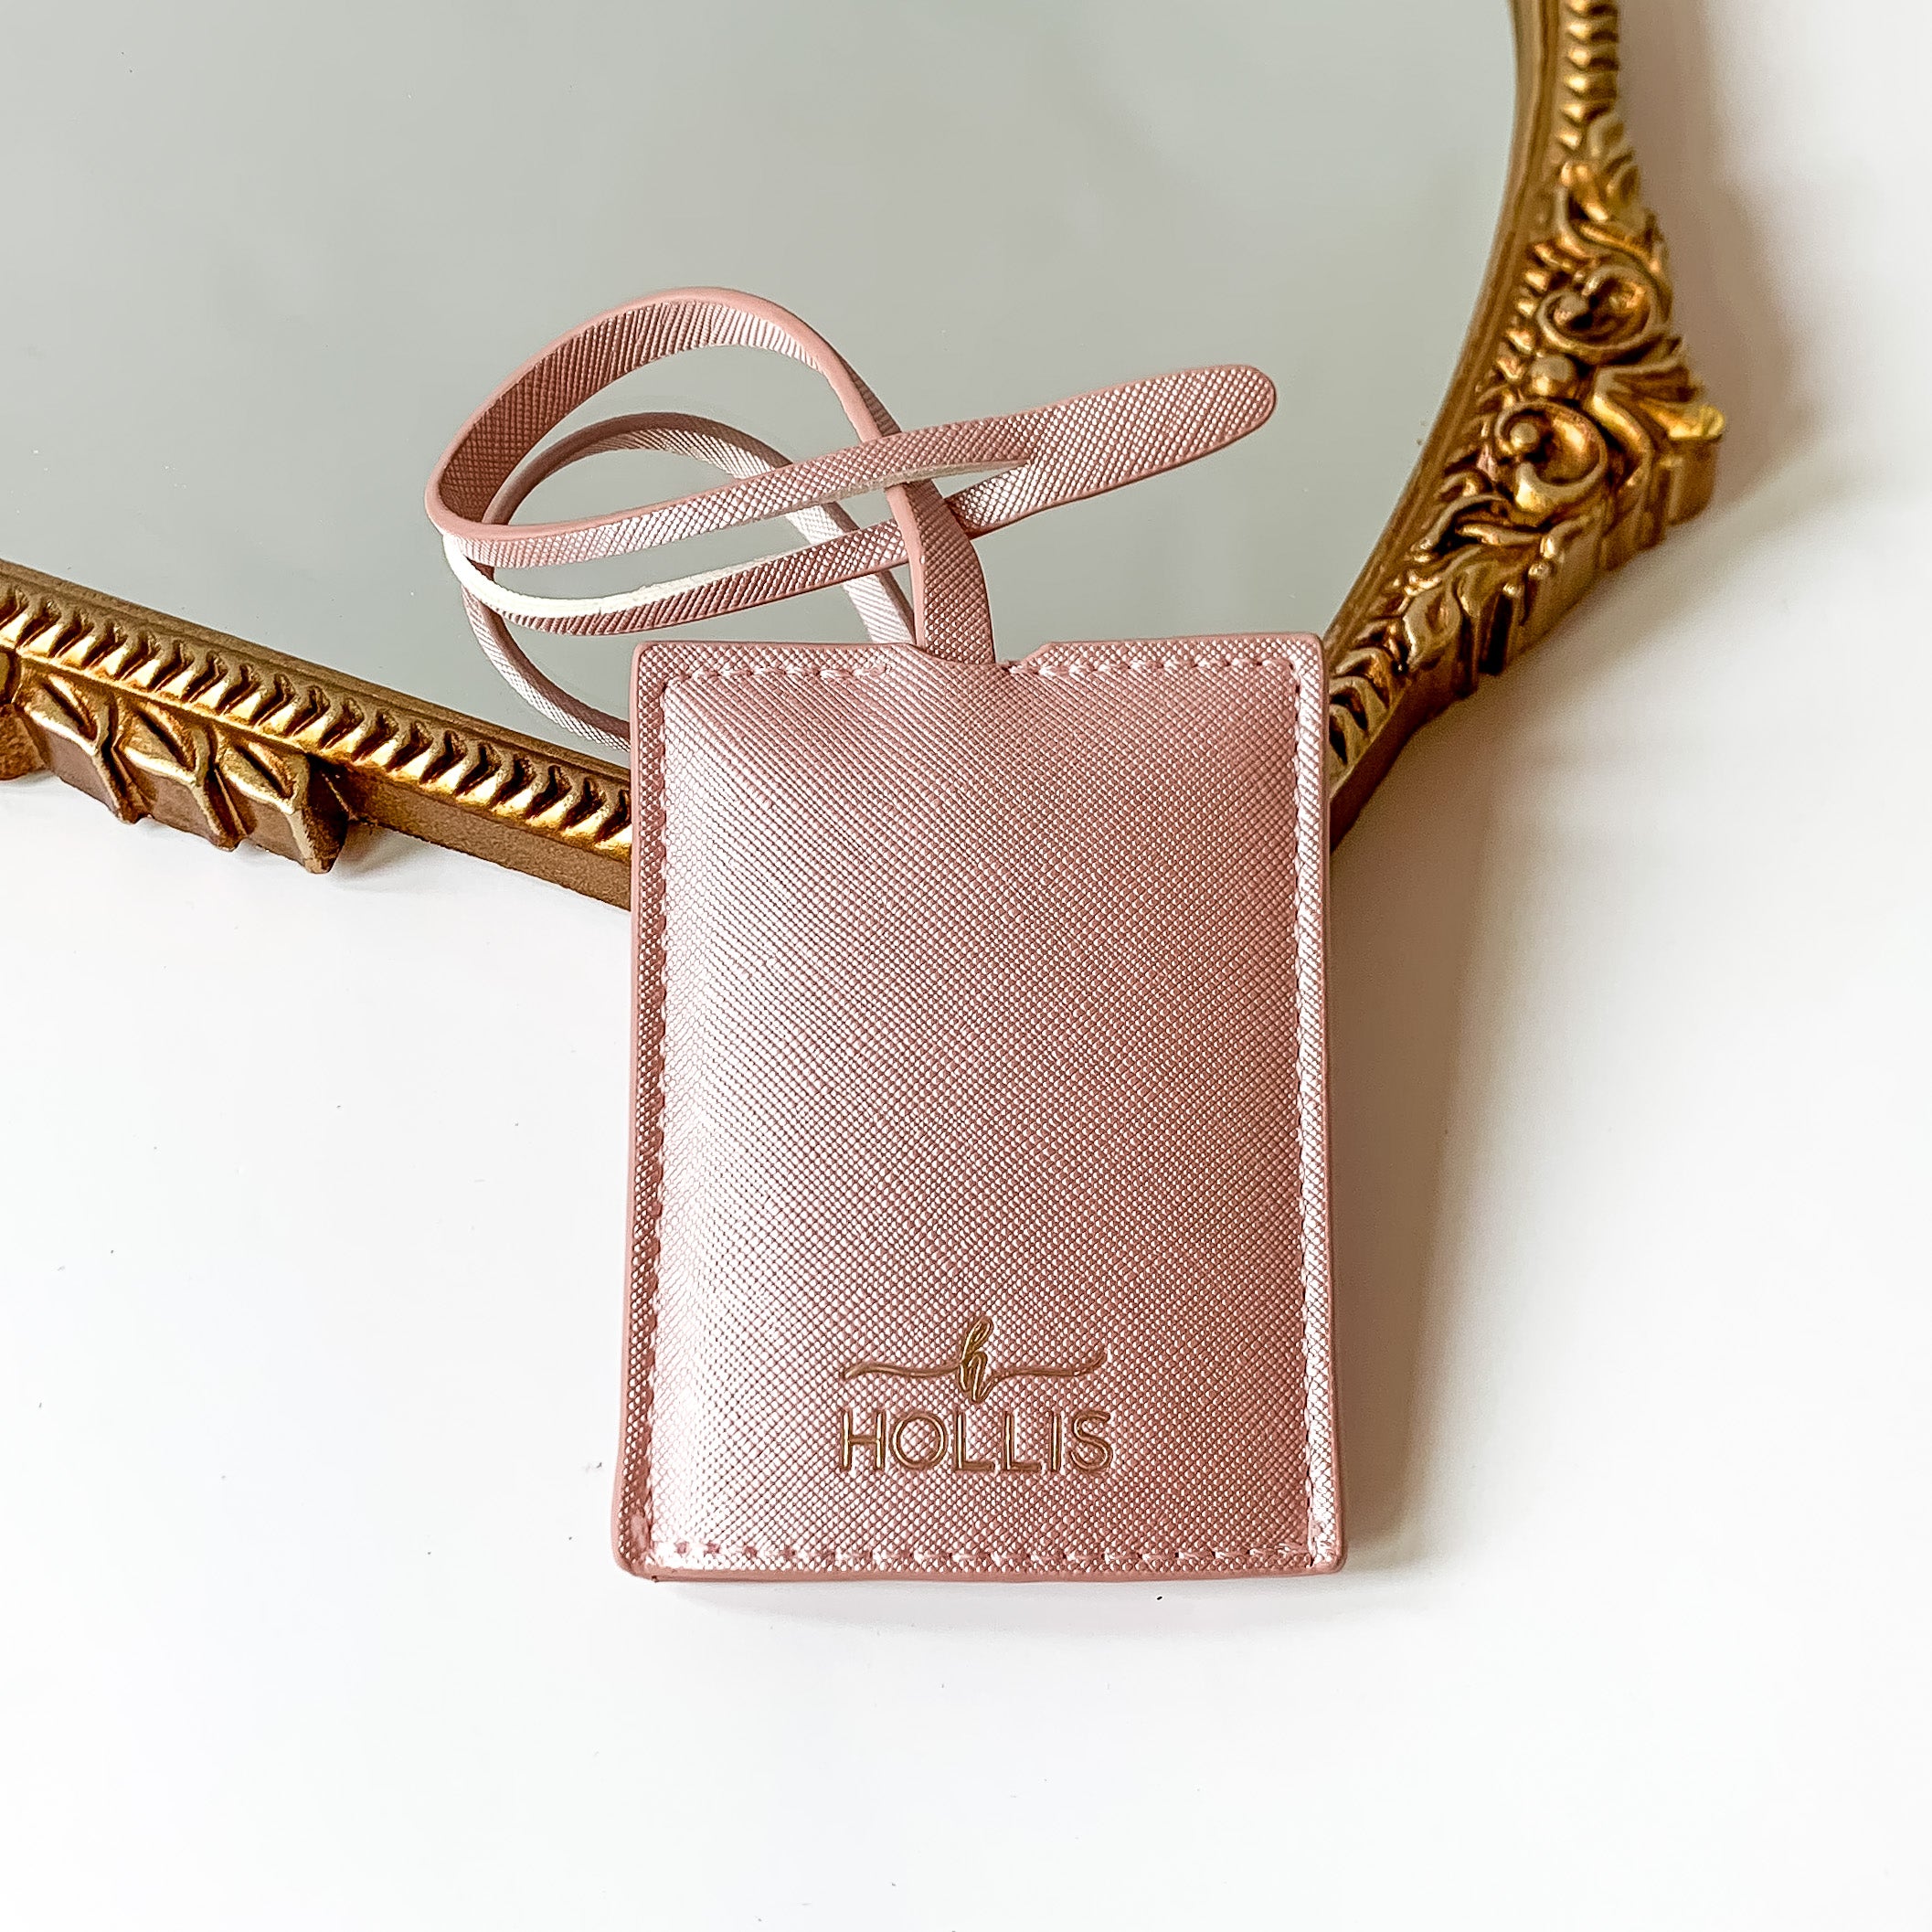 Metallic blush pink luggage tag with a gold HOLLIS emblem at the bottom. This luggage tag is pictured partially laying on a gold mirror on a white background. 